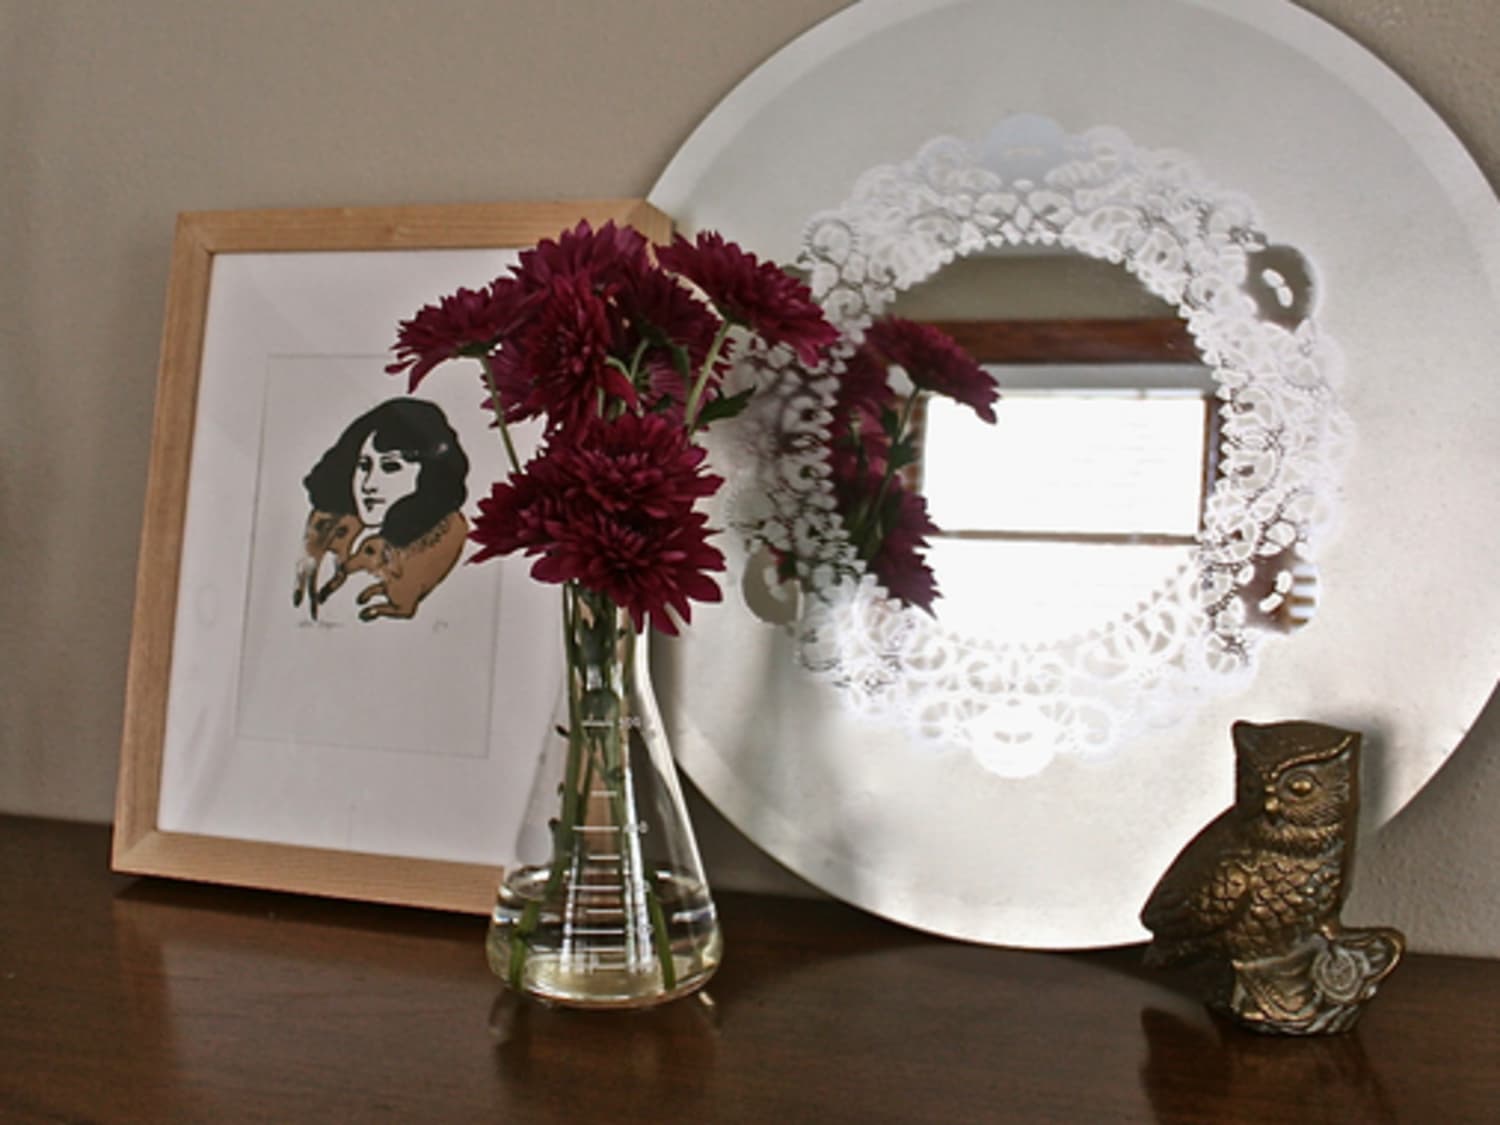 30 DIY Mirror Projects That Are Fun And Easy To Make